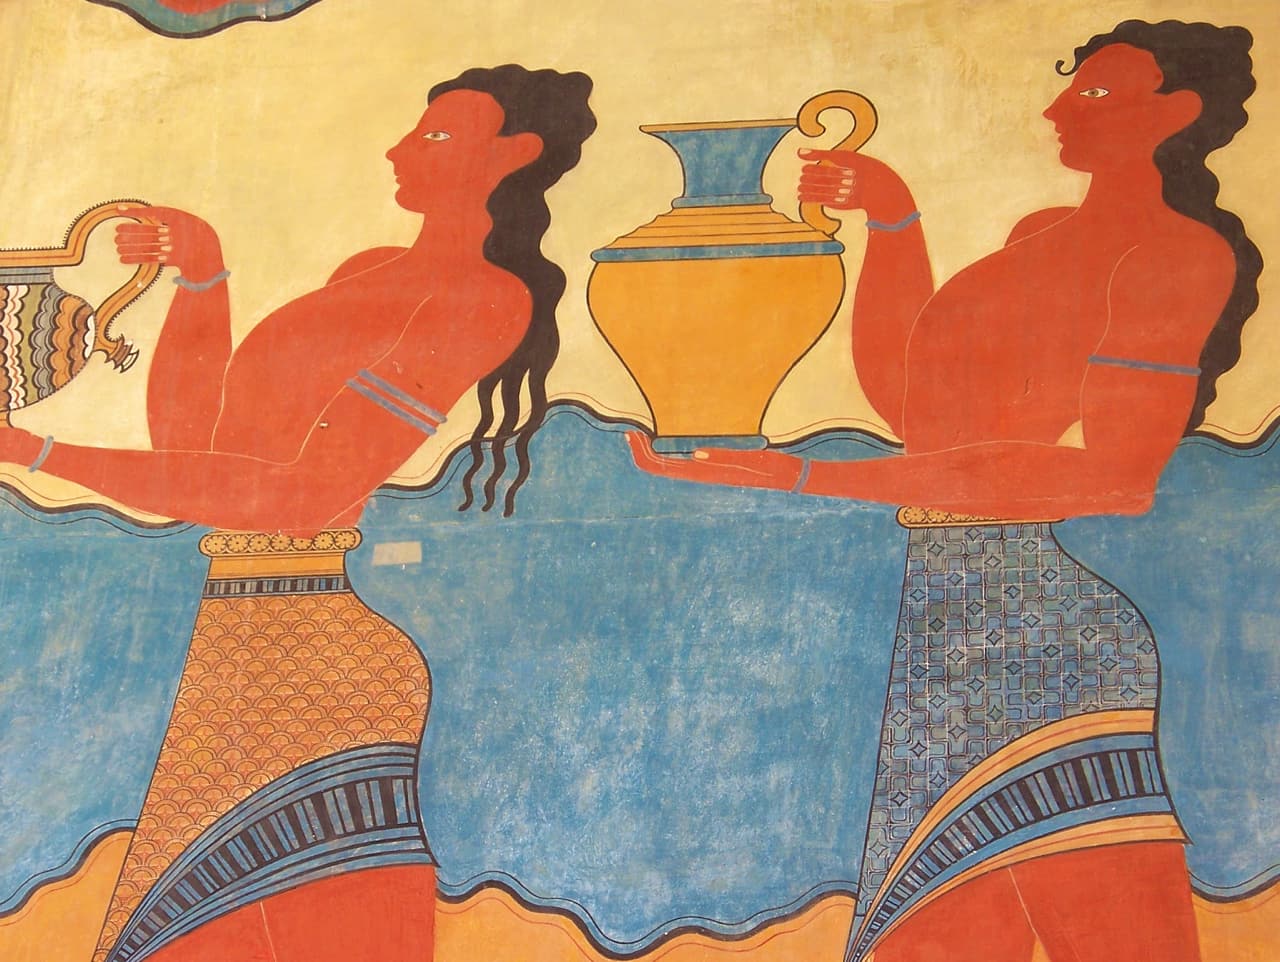 New Evidence Reveals Knossos, Europe’s Oldest City, Three Times Bigger than Previously Believed